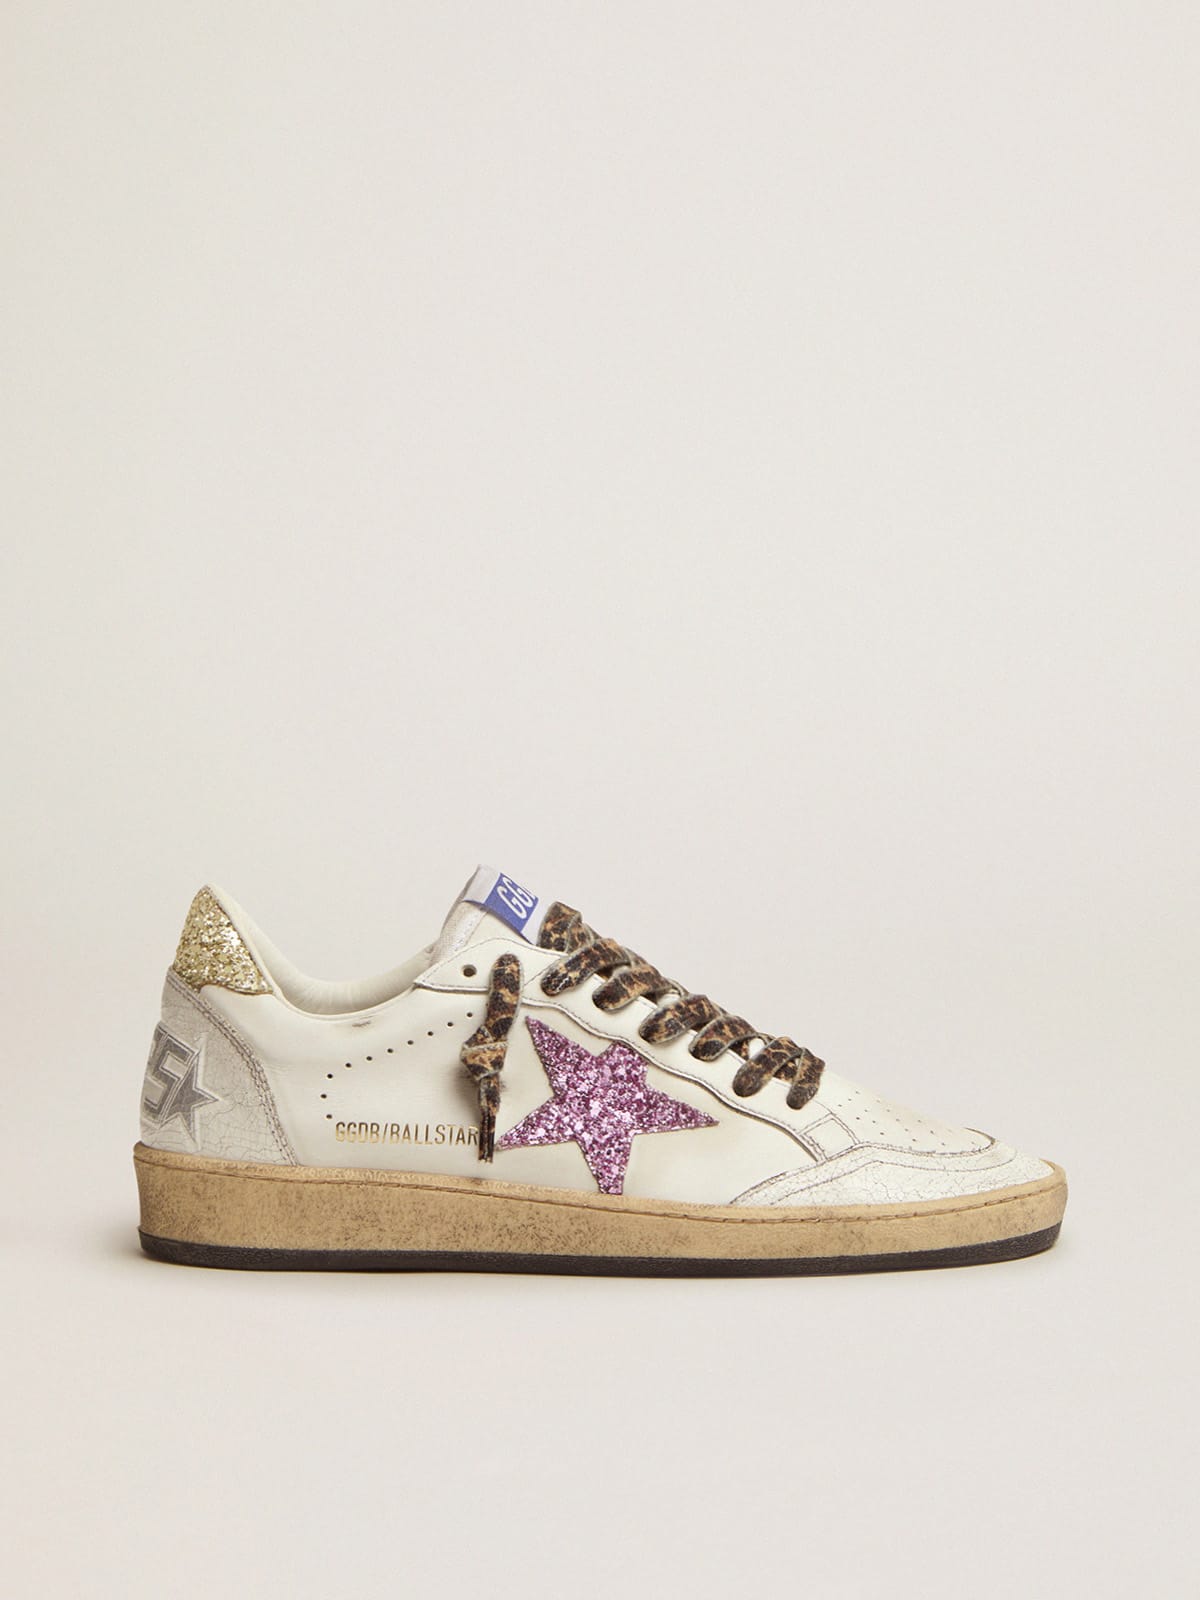 Ball Star LTD sneakers in leather with glitter heel tab and star ...